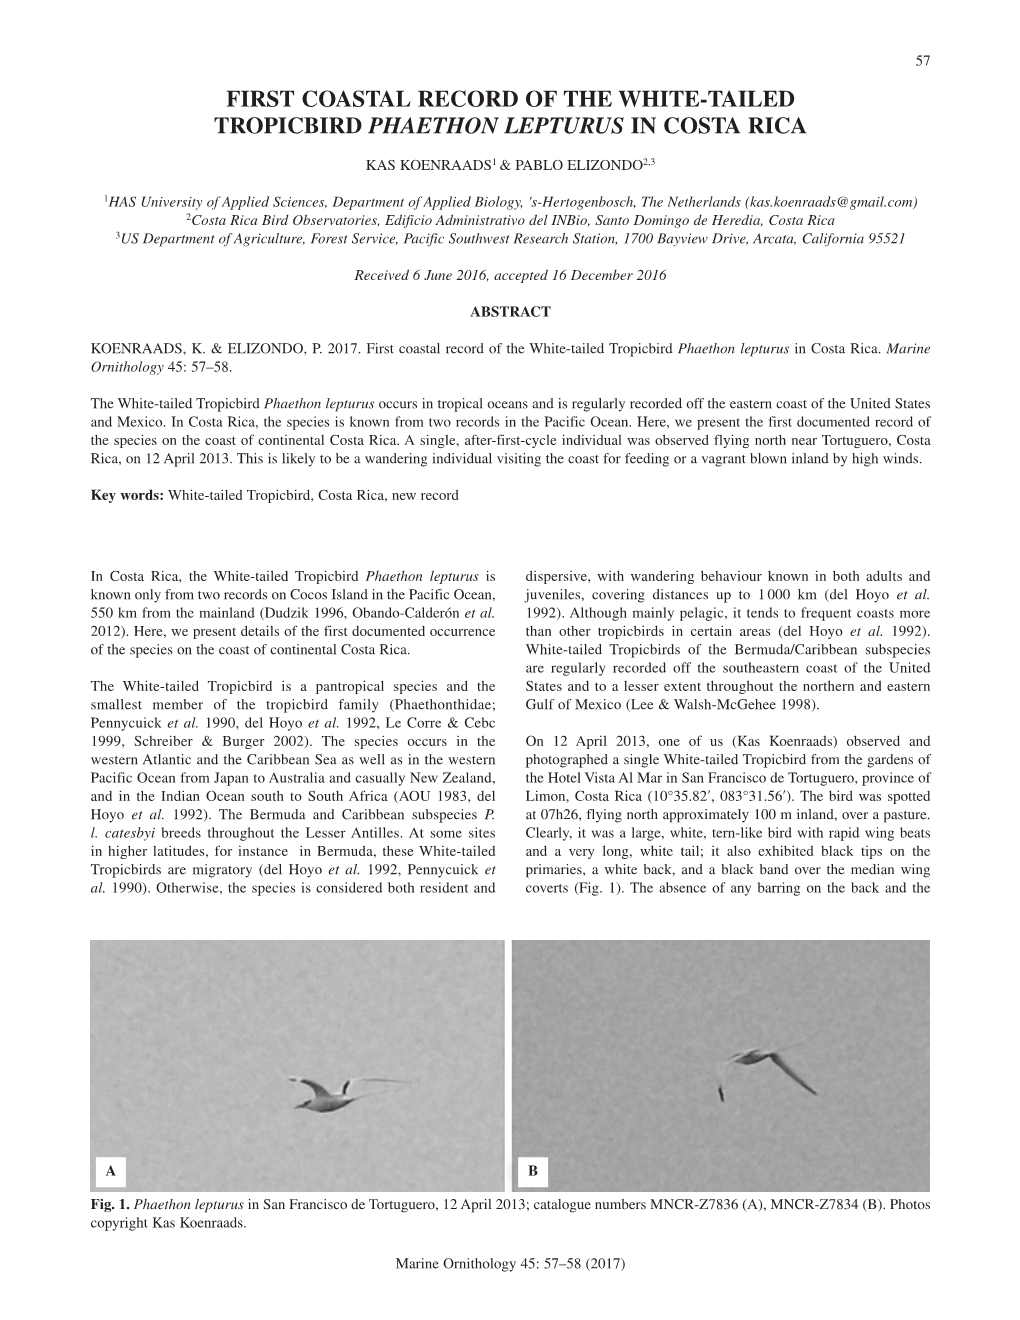 (2017). First Coastal Record of the White-Tailed Tropicbird Phaethon